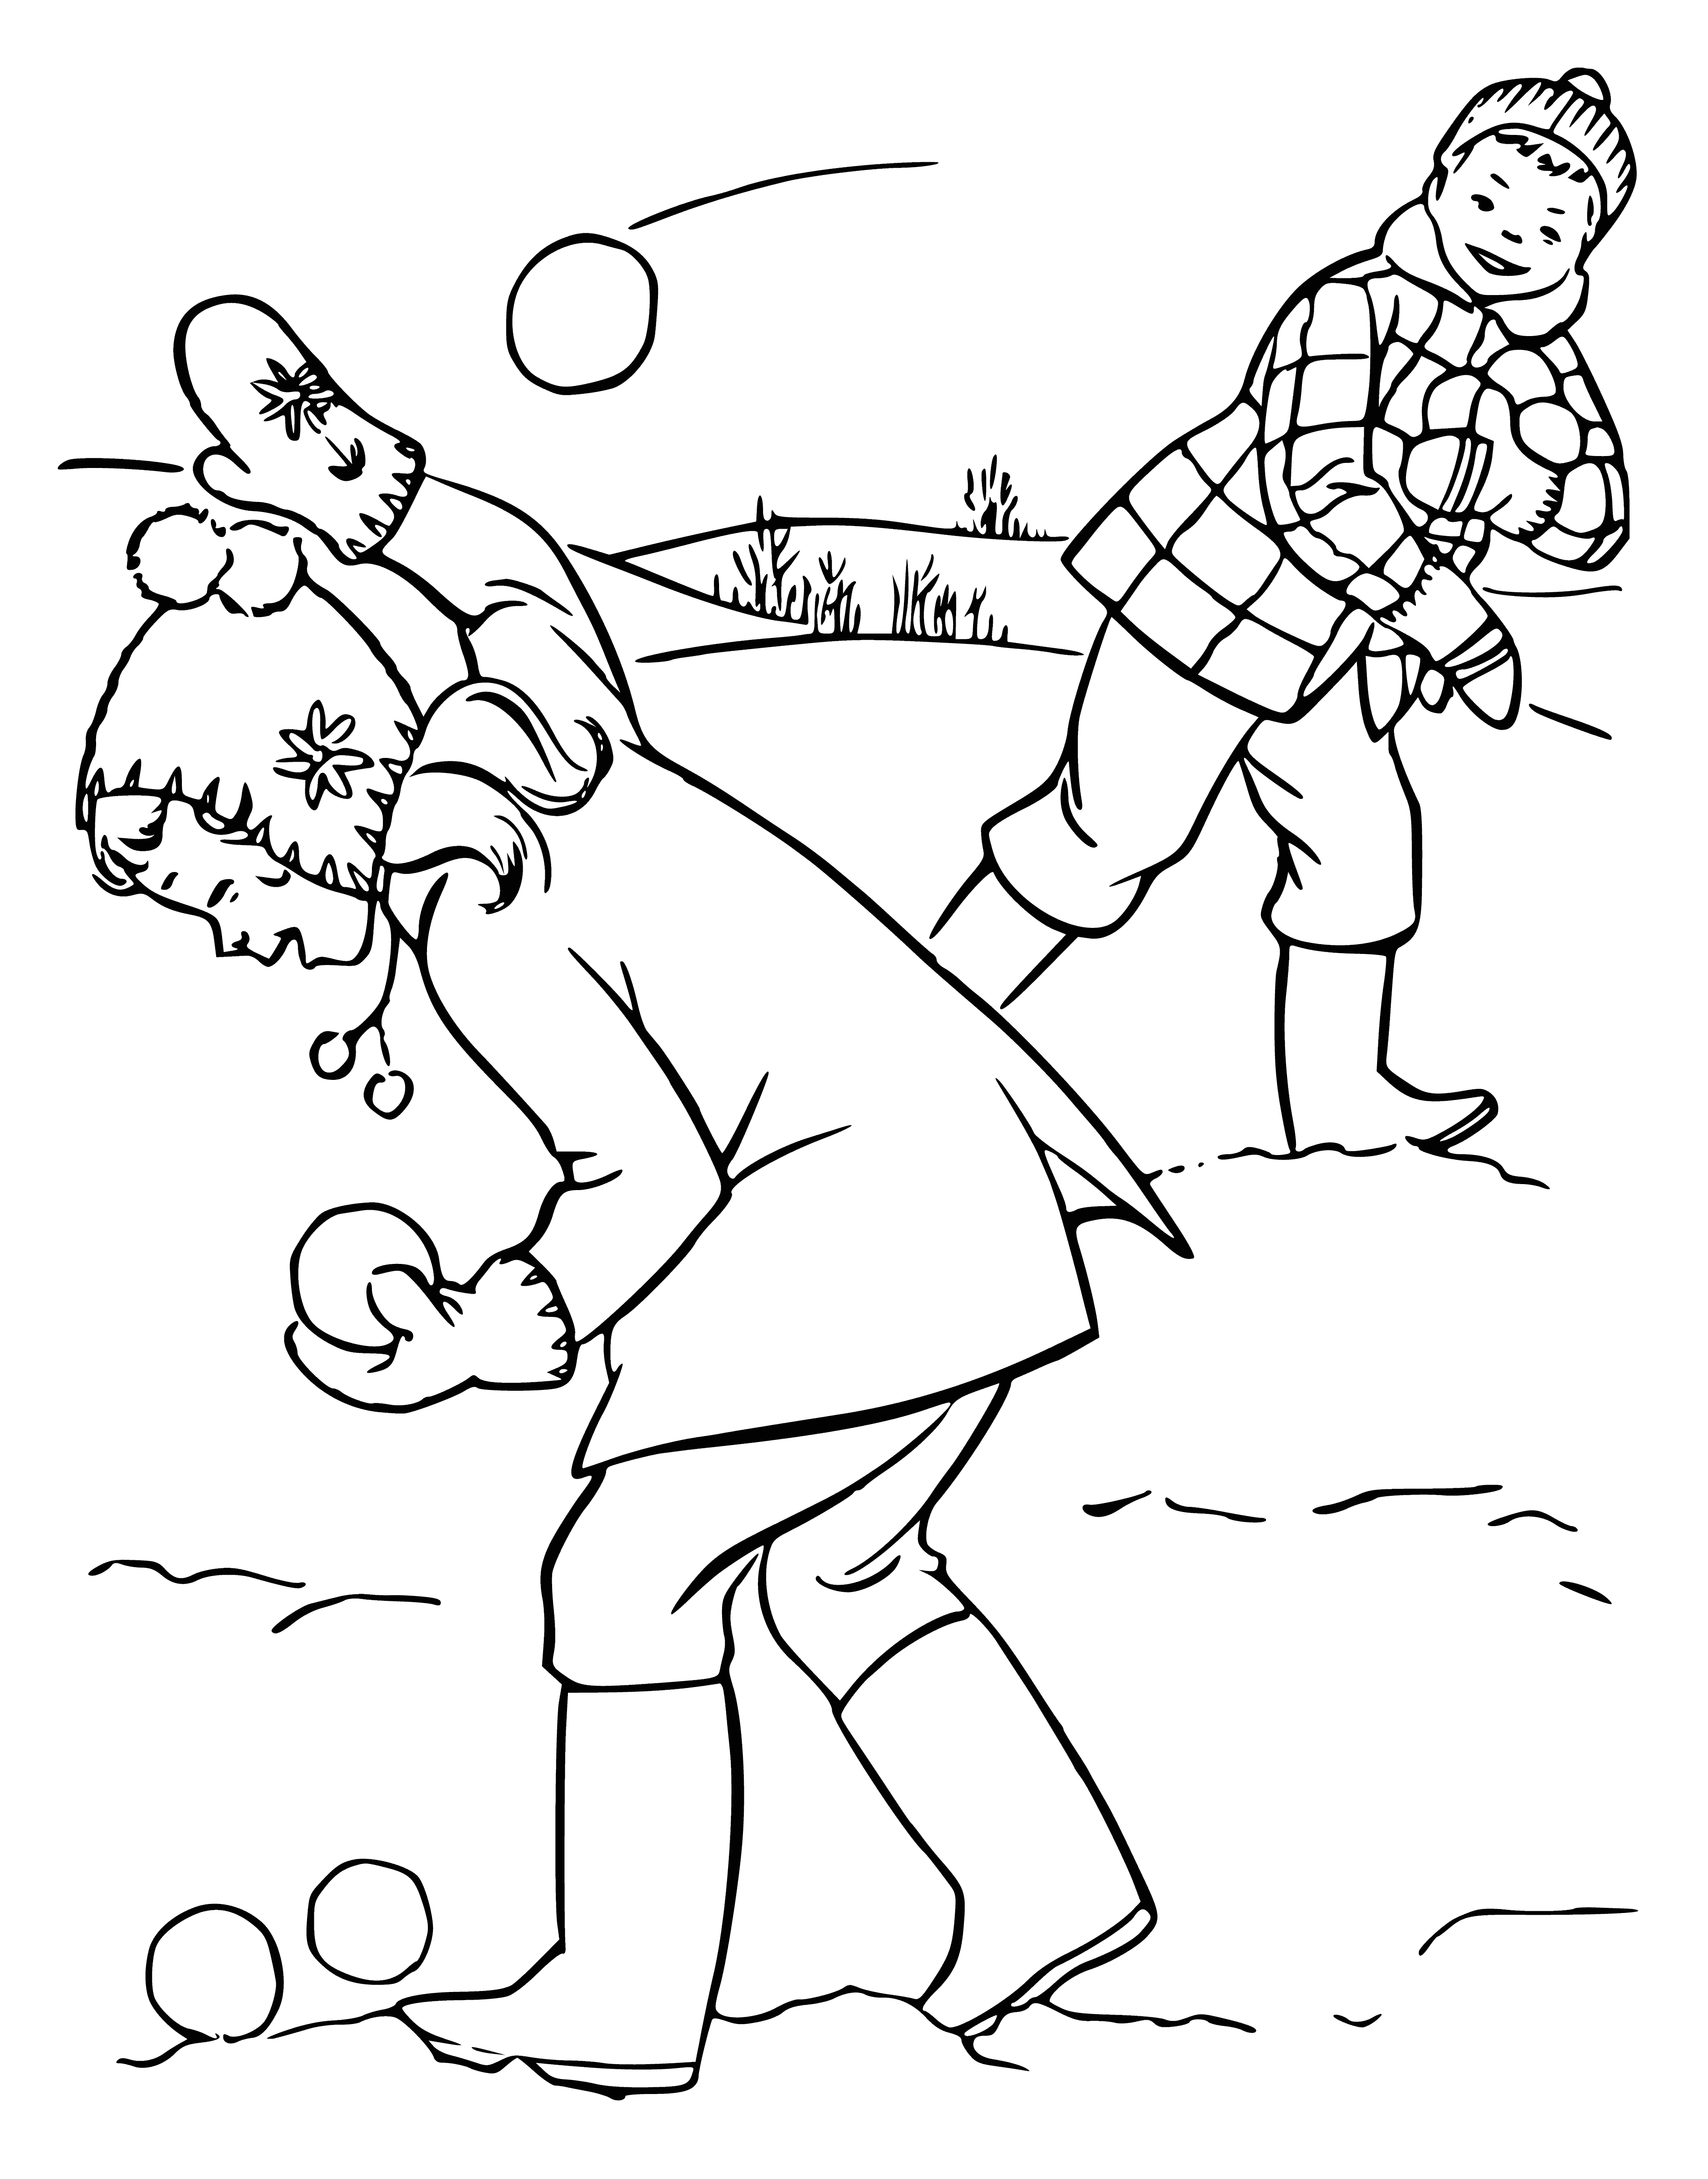 Snowball game coloring page